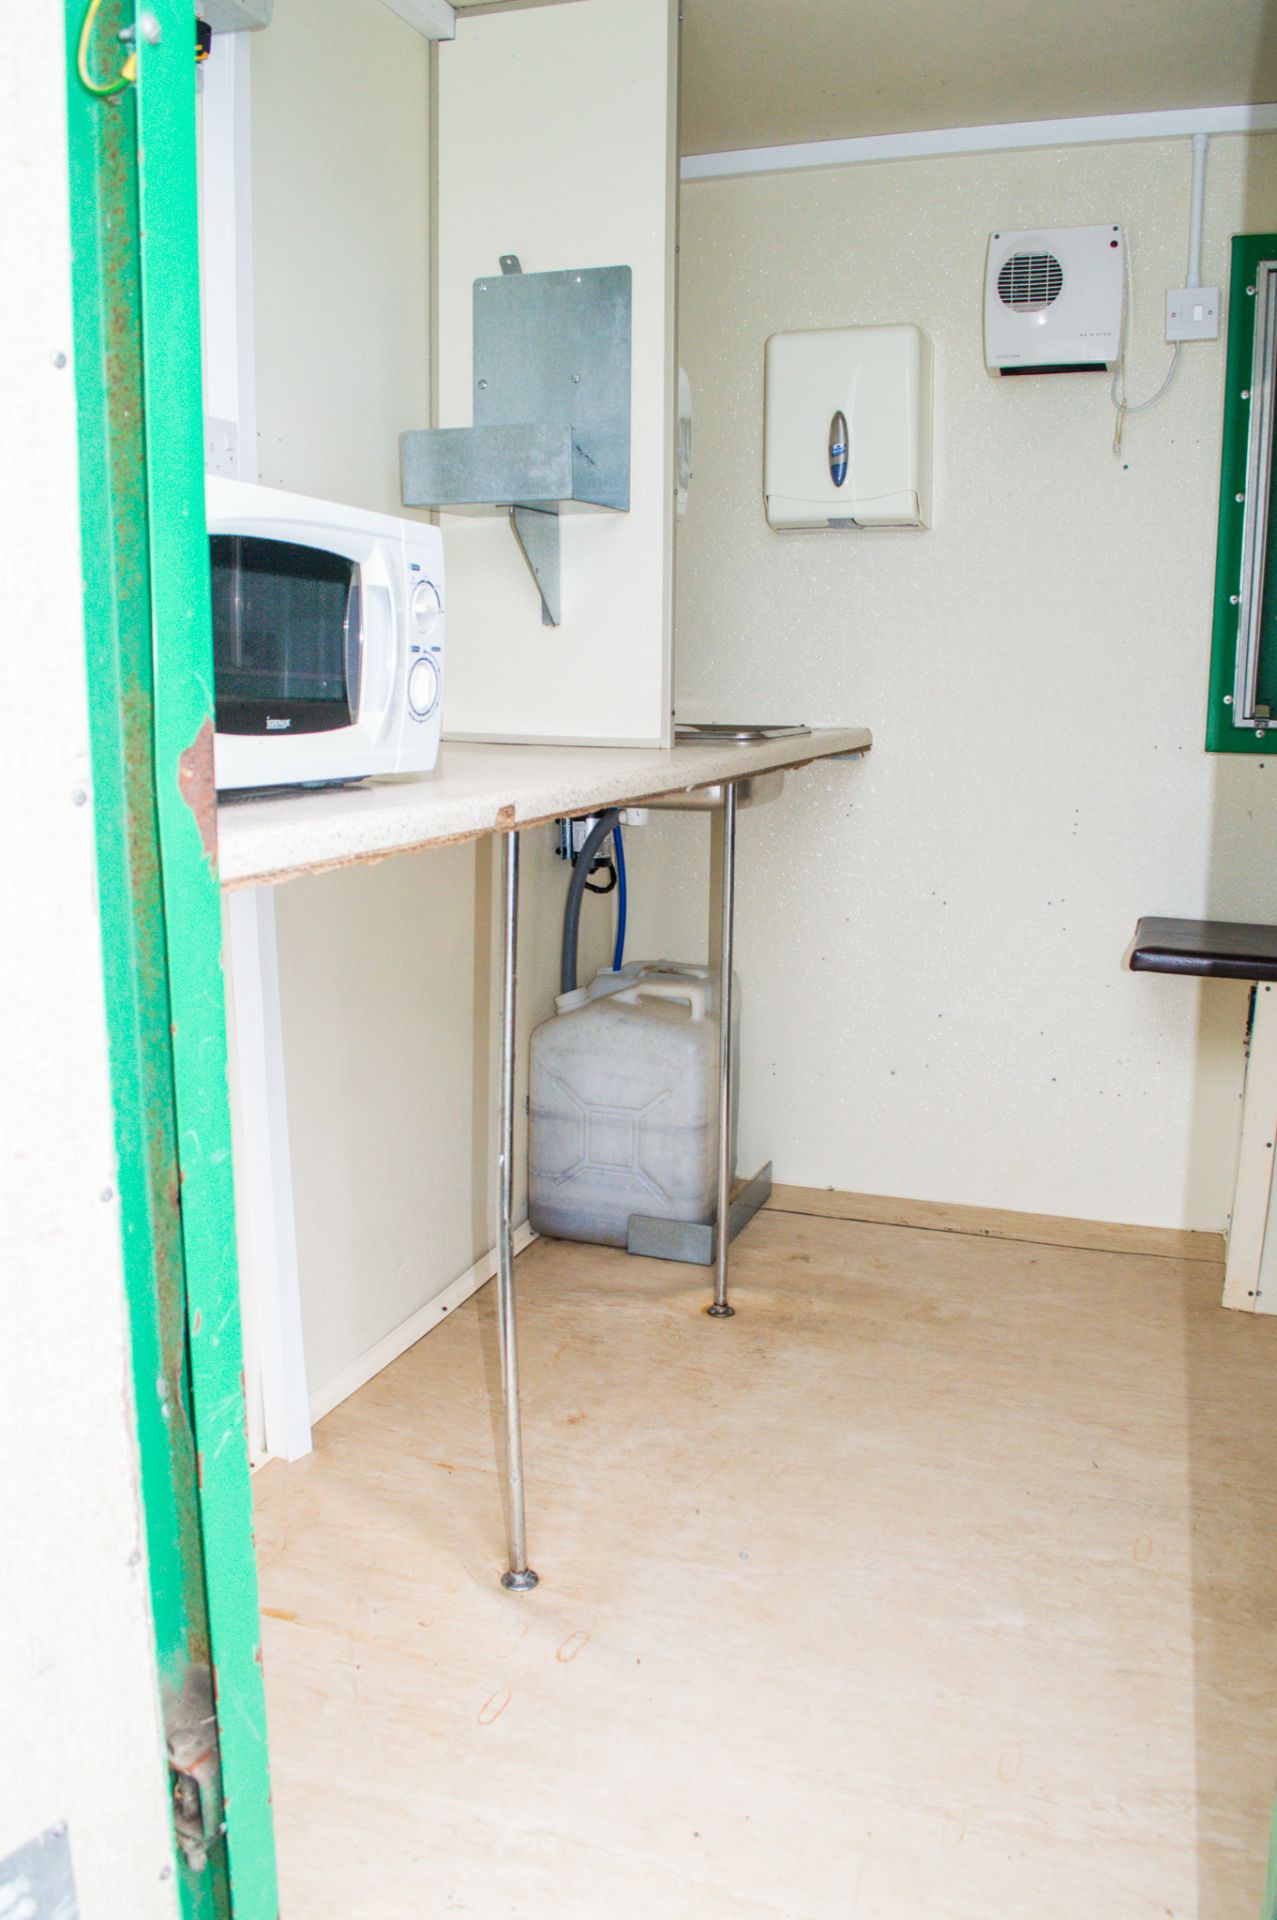 Ground Hog 12' by 8' fast tow self lowering welfare unit c/w canteen area, toilet room, generator - Image 10 of 13